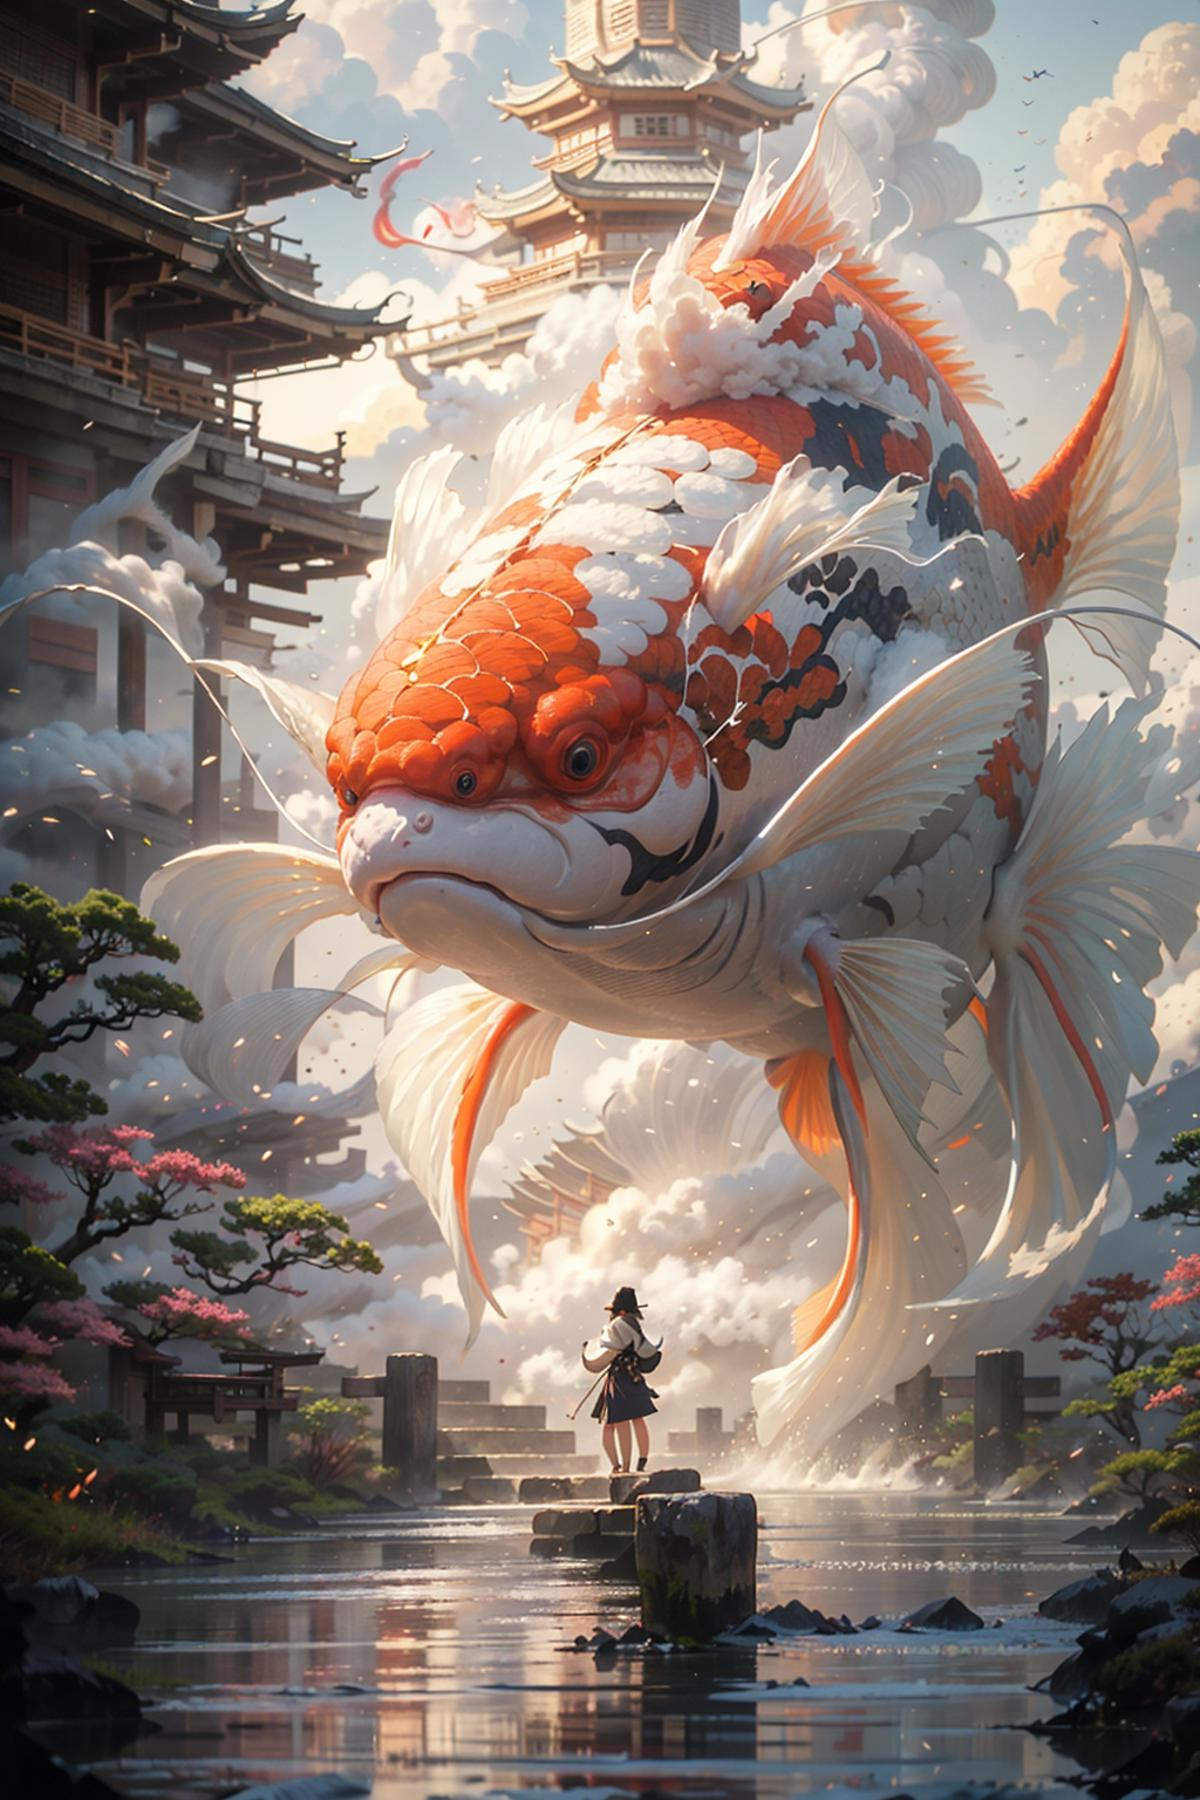 A beautifully illustrated scene with a large goldfish and a woman.